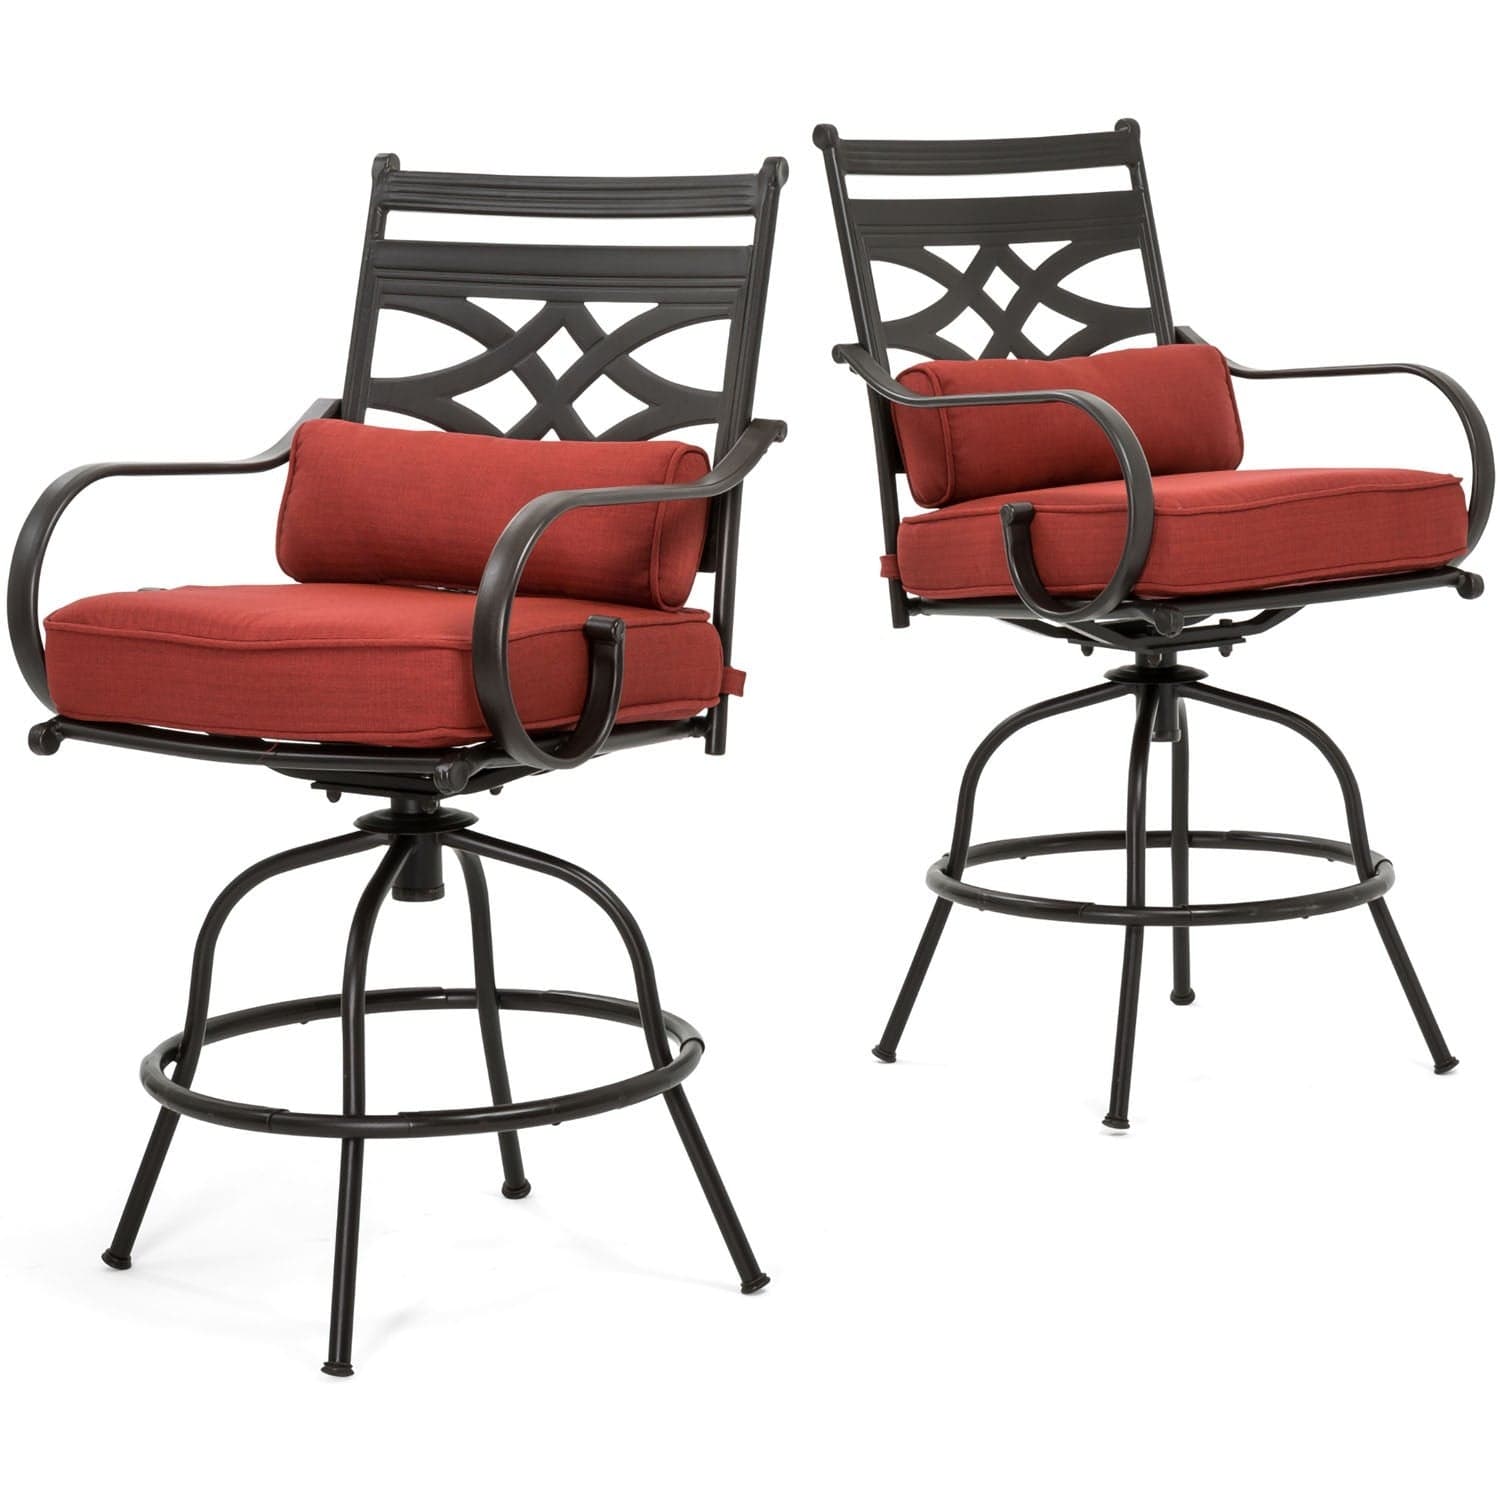 Hanover Outdoor Dining Set Hanover Montclair 5-Piece High-Dining Patio Set in Chili Red with 4 Swivel Chairs and a 33-In. Counter-Height Dining Table - MCLRDN5PCBR-CHL